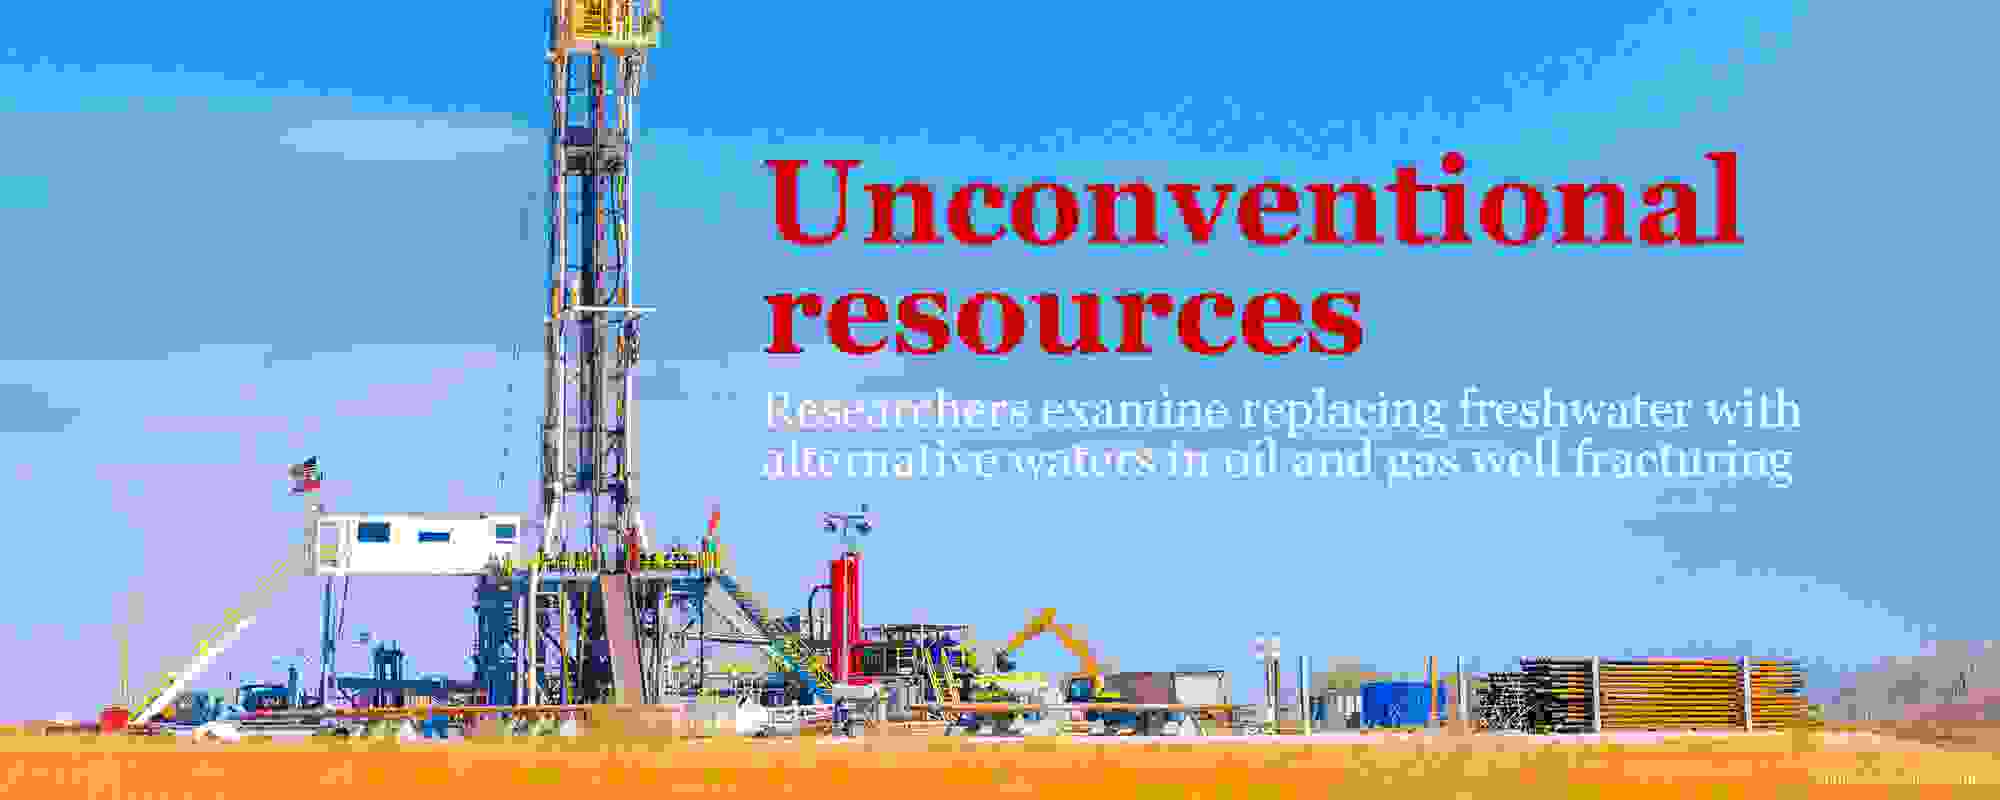 Unconventional resources